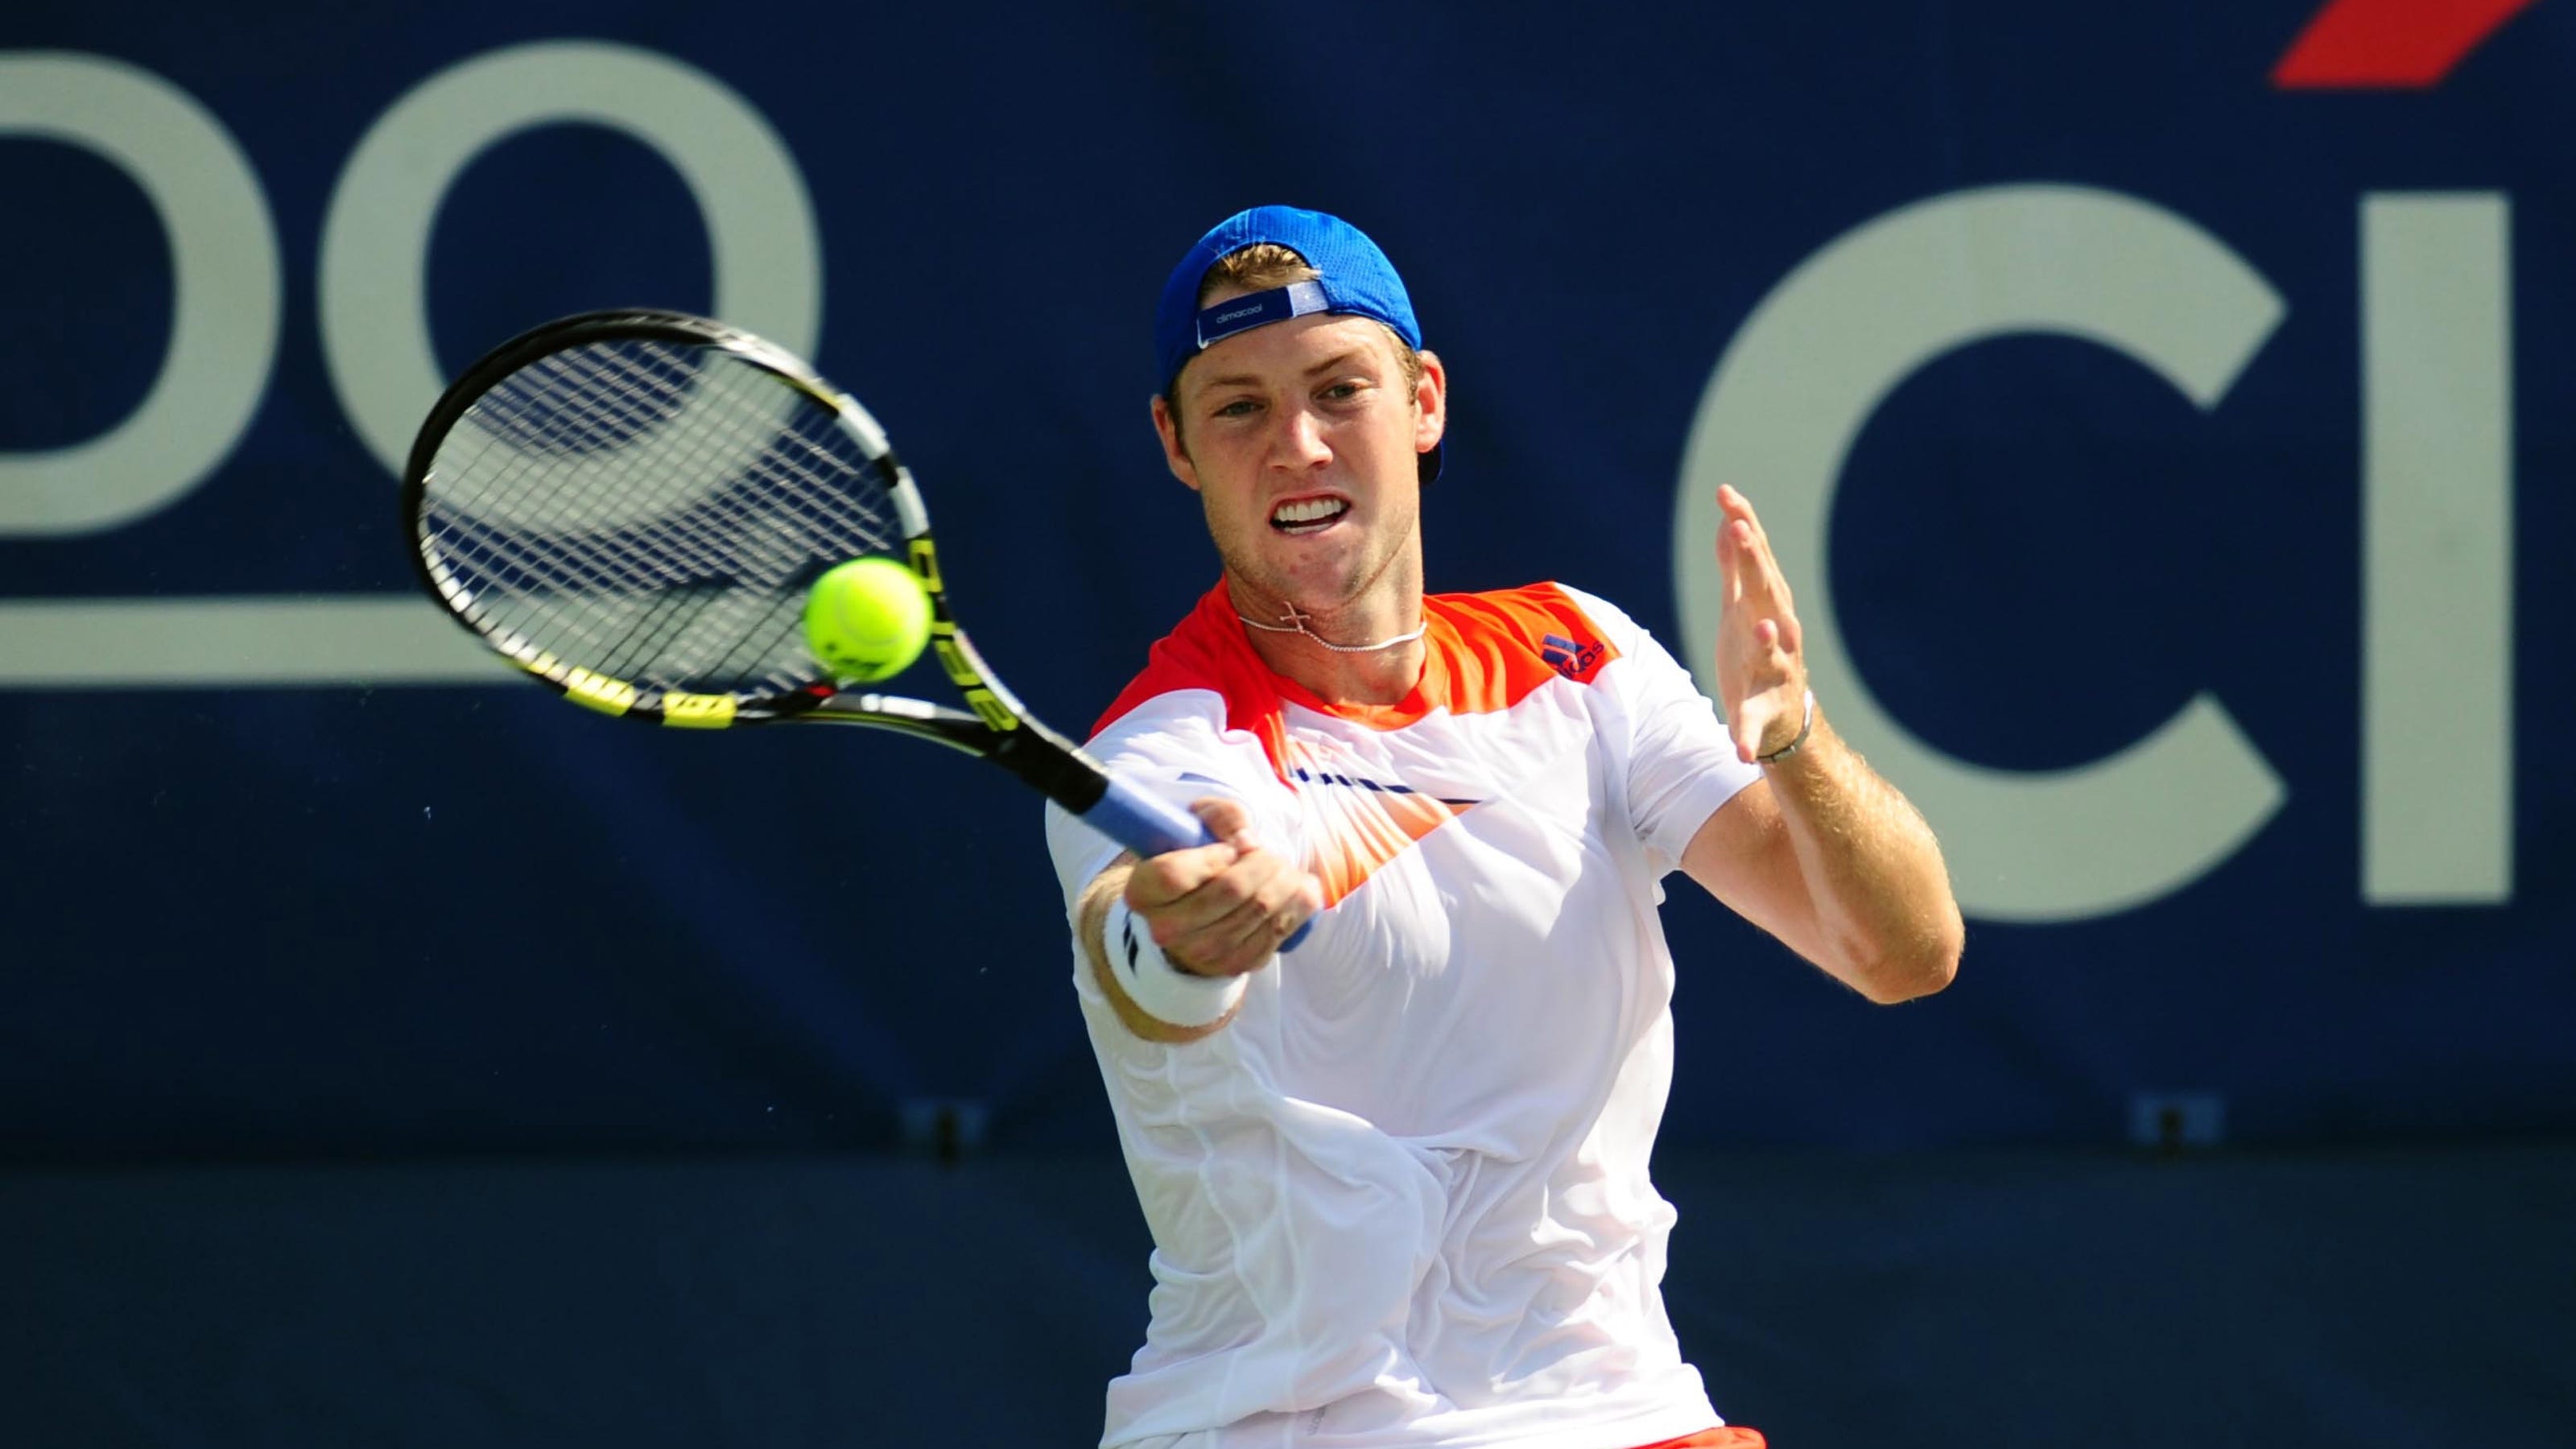 Jack Sock aims to continue his climb